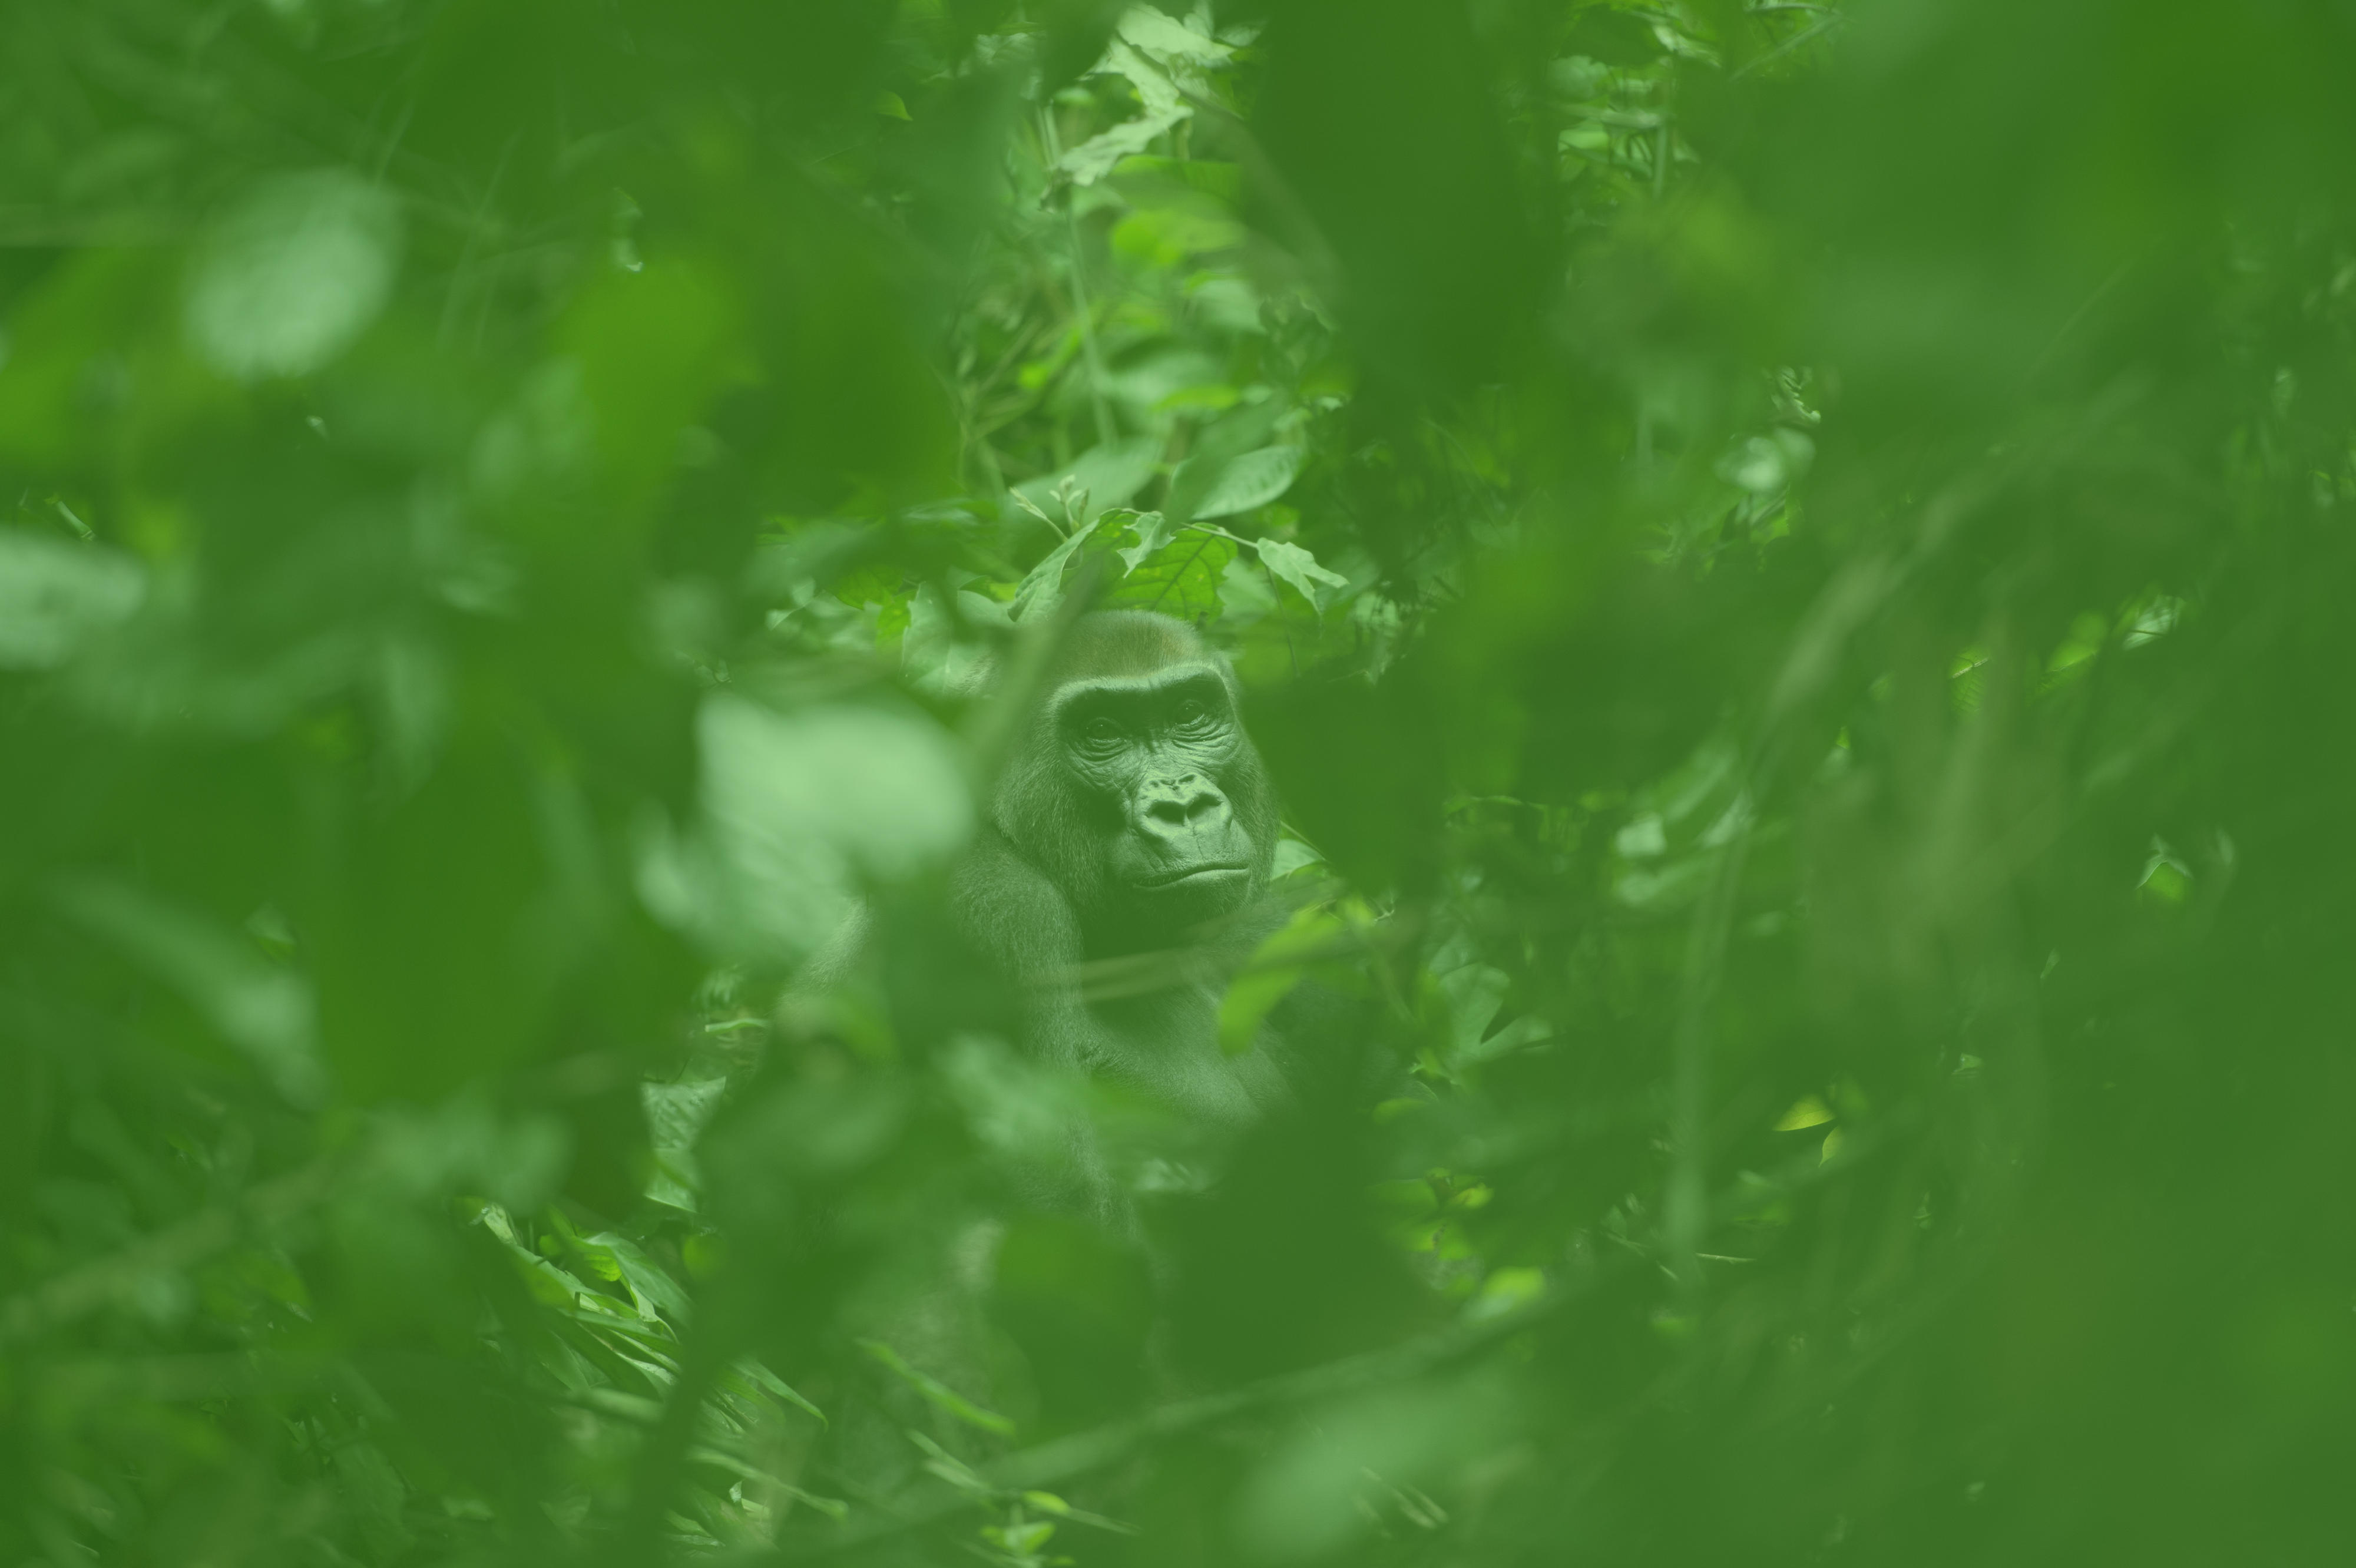 A Western Lowland Gorilla in Dzanga National Park in the border triangle of Congo, Cameroon and the Central African Republic.